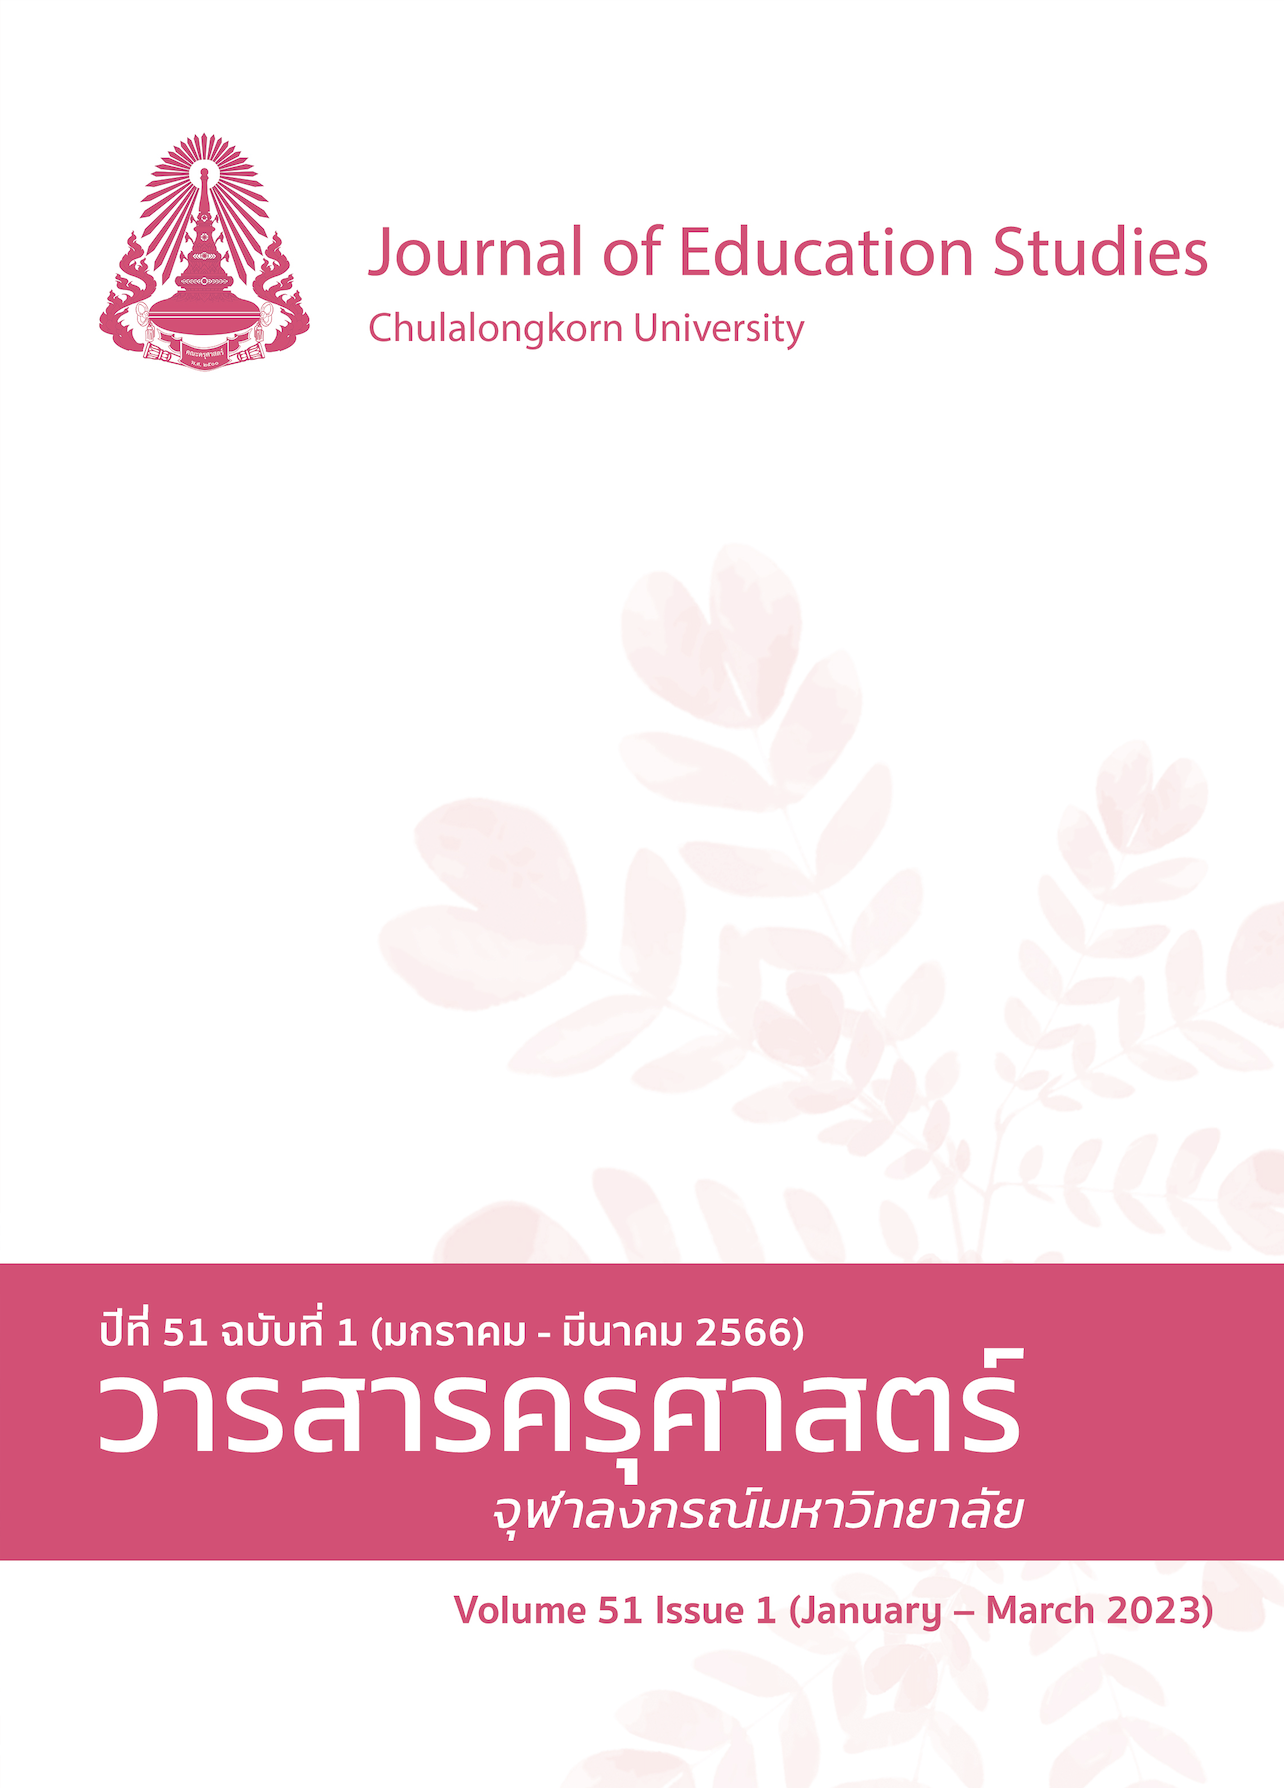 					View Vol. 51 No. 1 (2023): Journal of Education Studies, Volume 51 Issue 1 (January - March 2023)
				